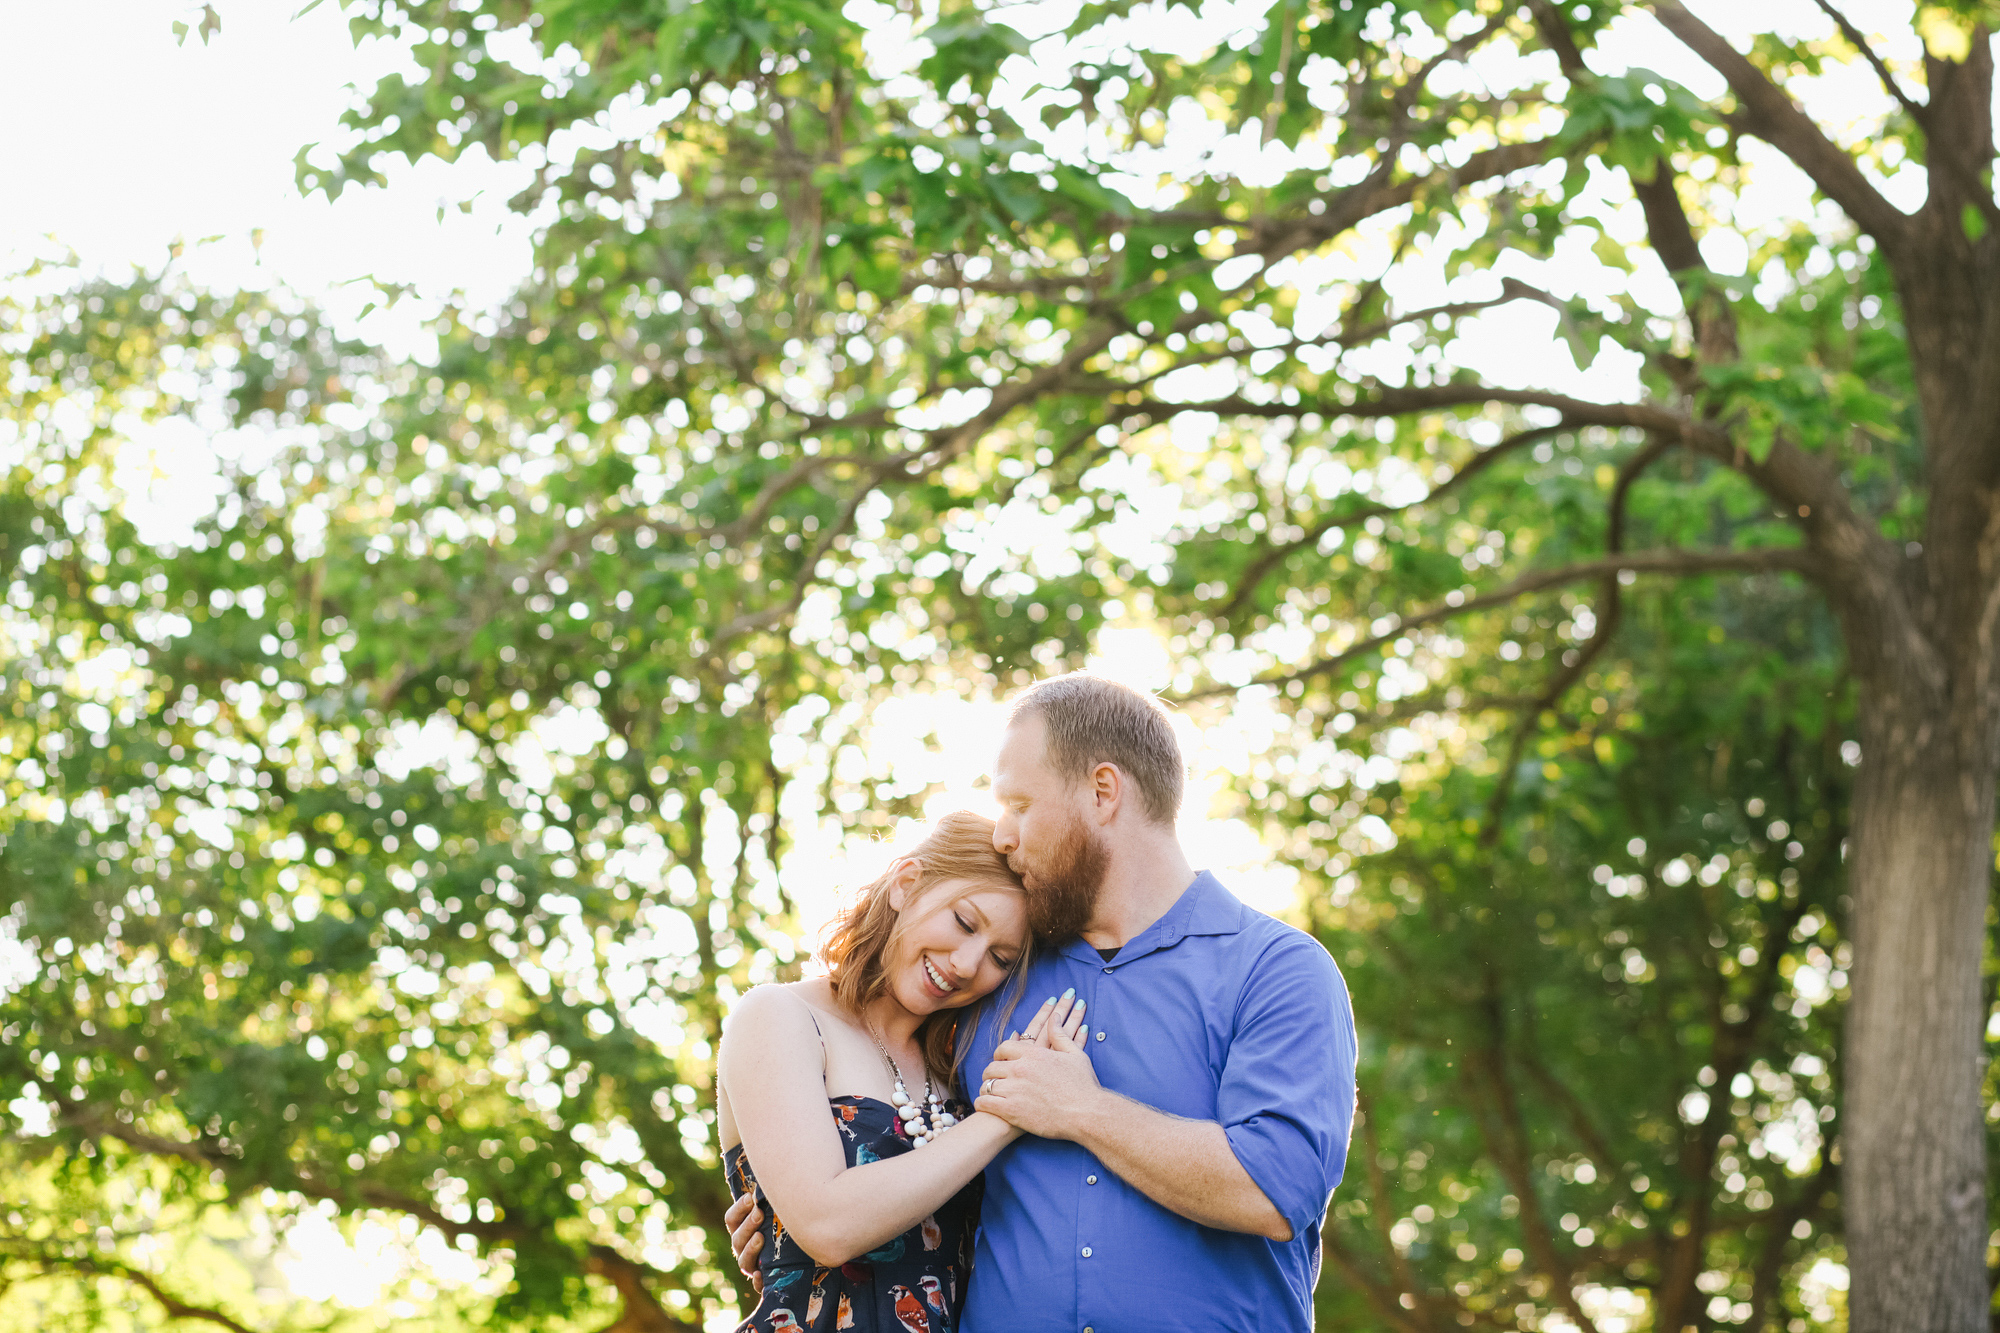 A cute moment of Tonya smiling and hugging Nick during their engagement session. 